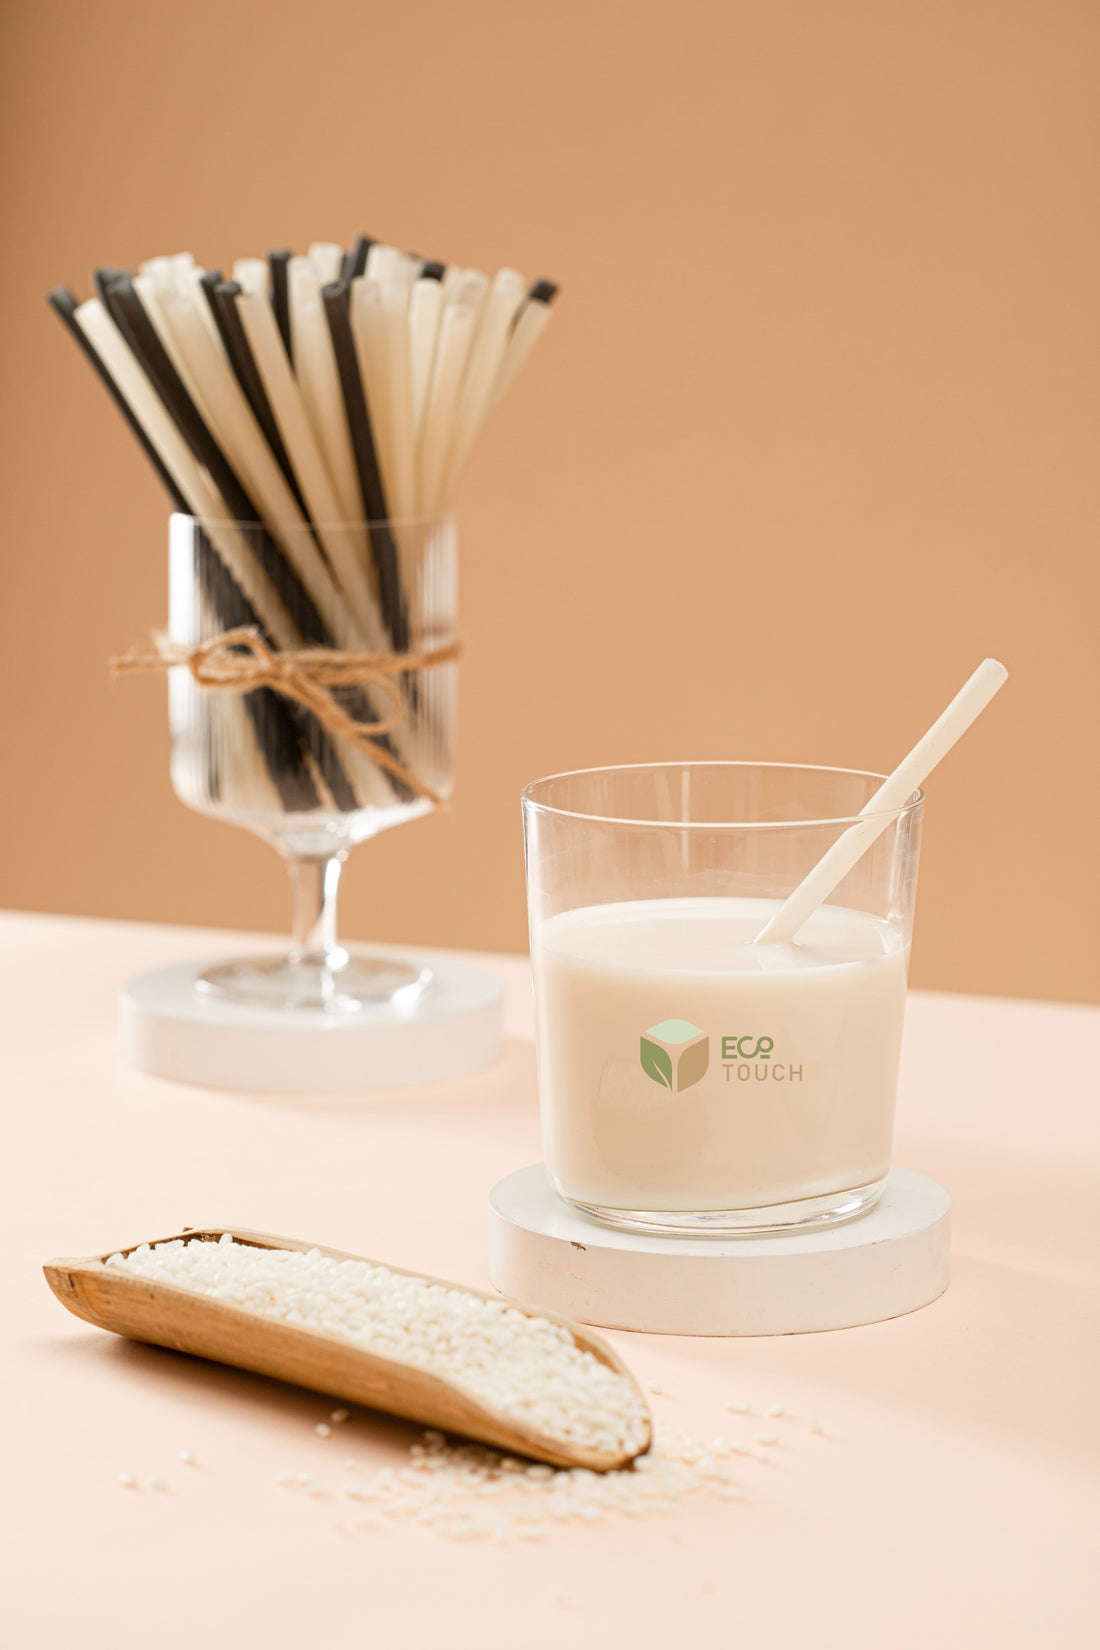 PAPER AND BAMBOO STRAWS CONTAIN PFAS CHEMICALS